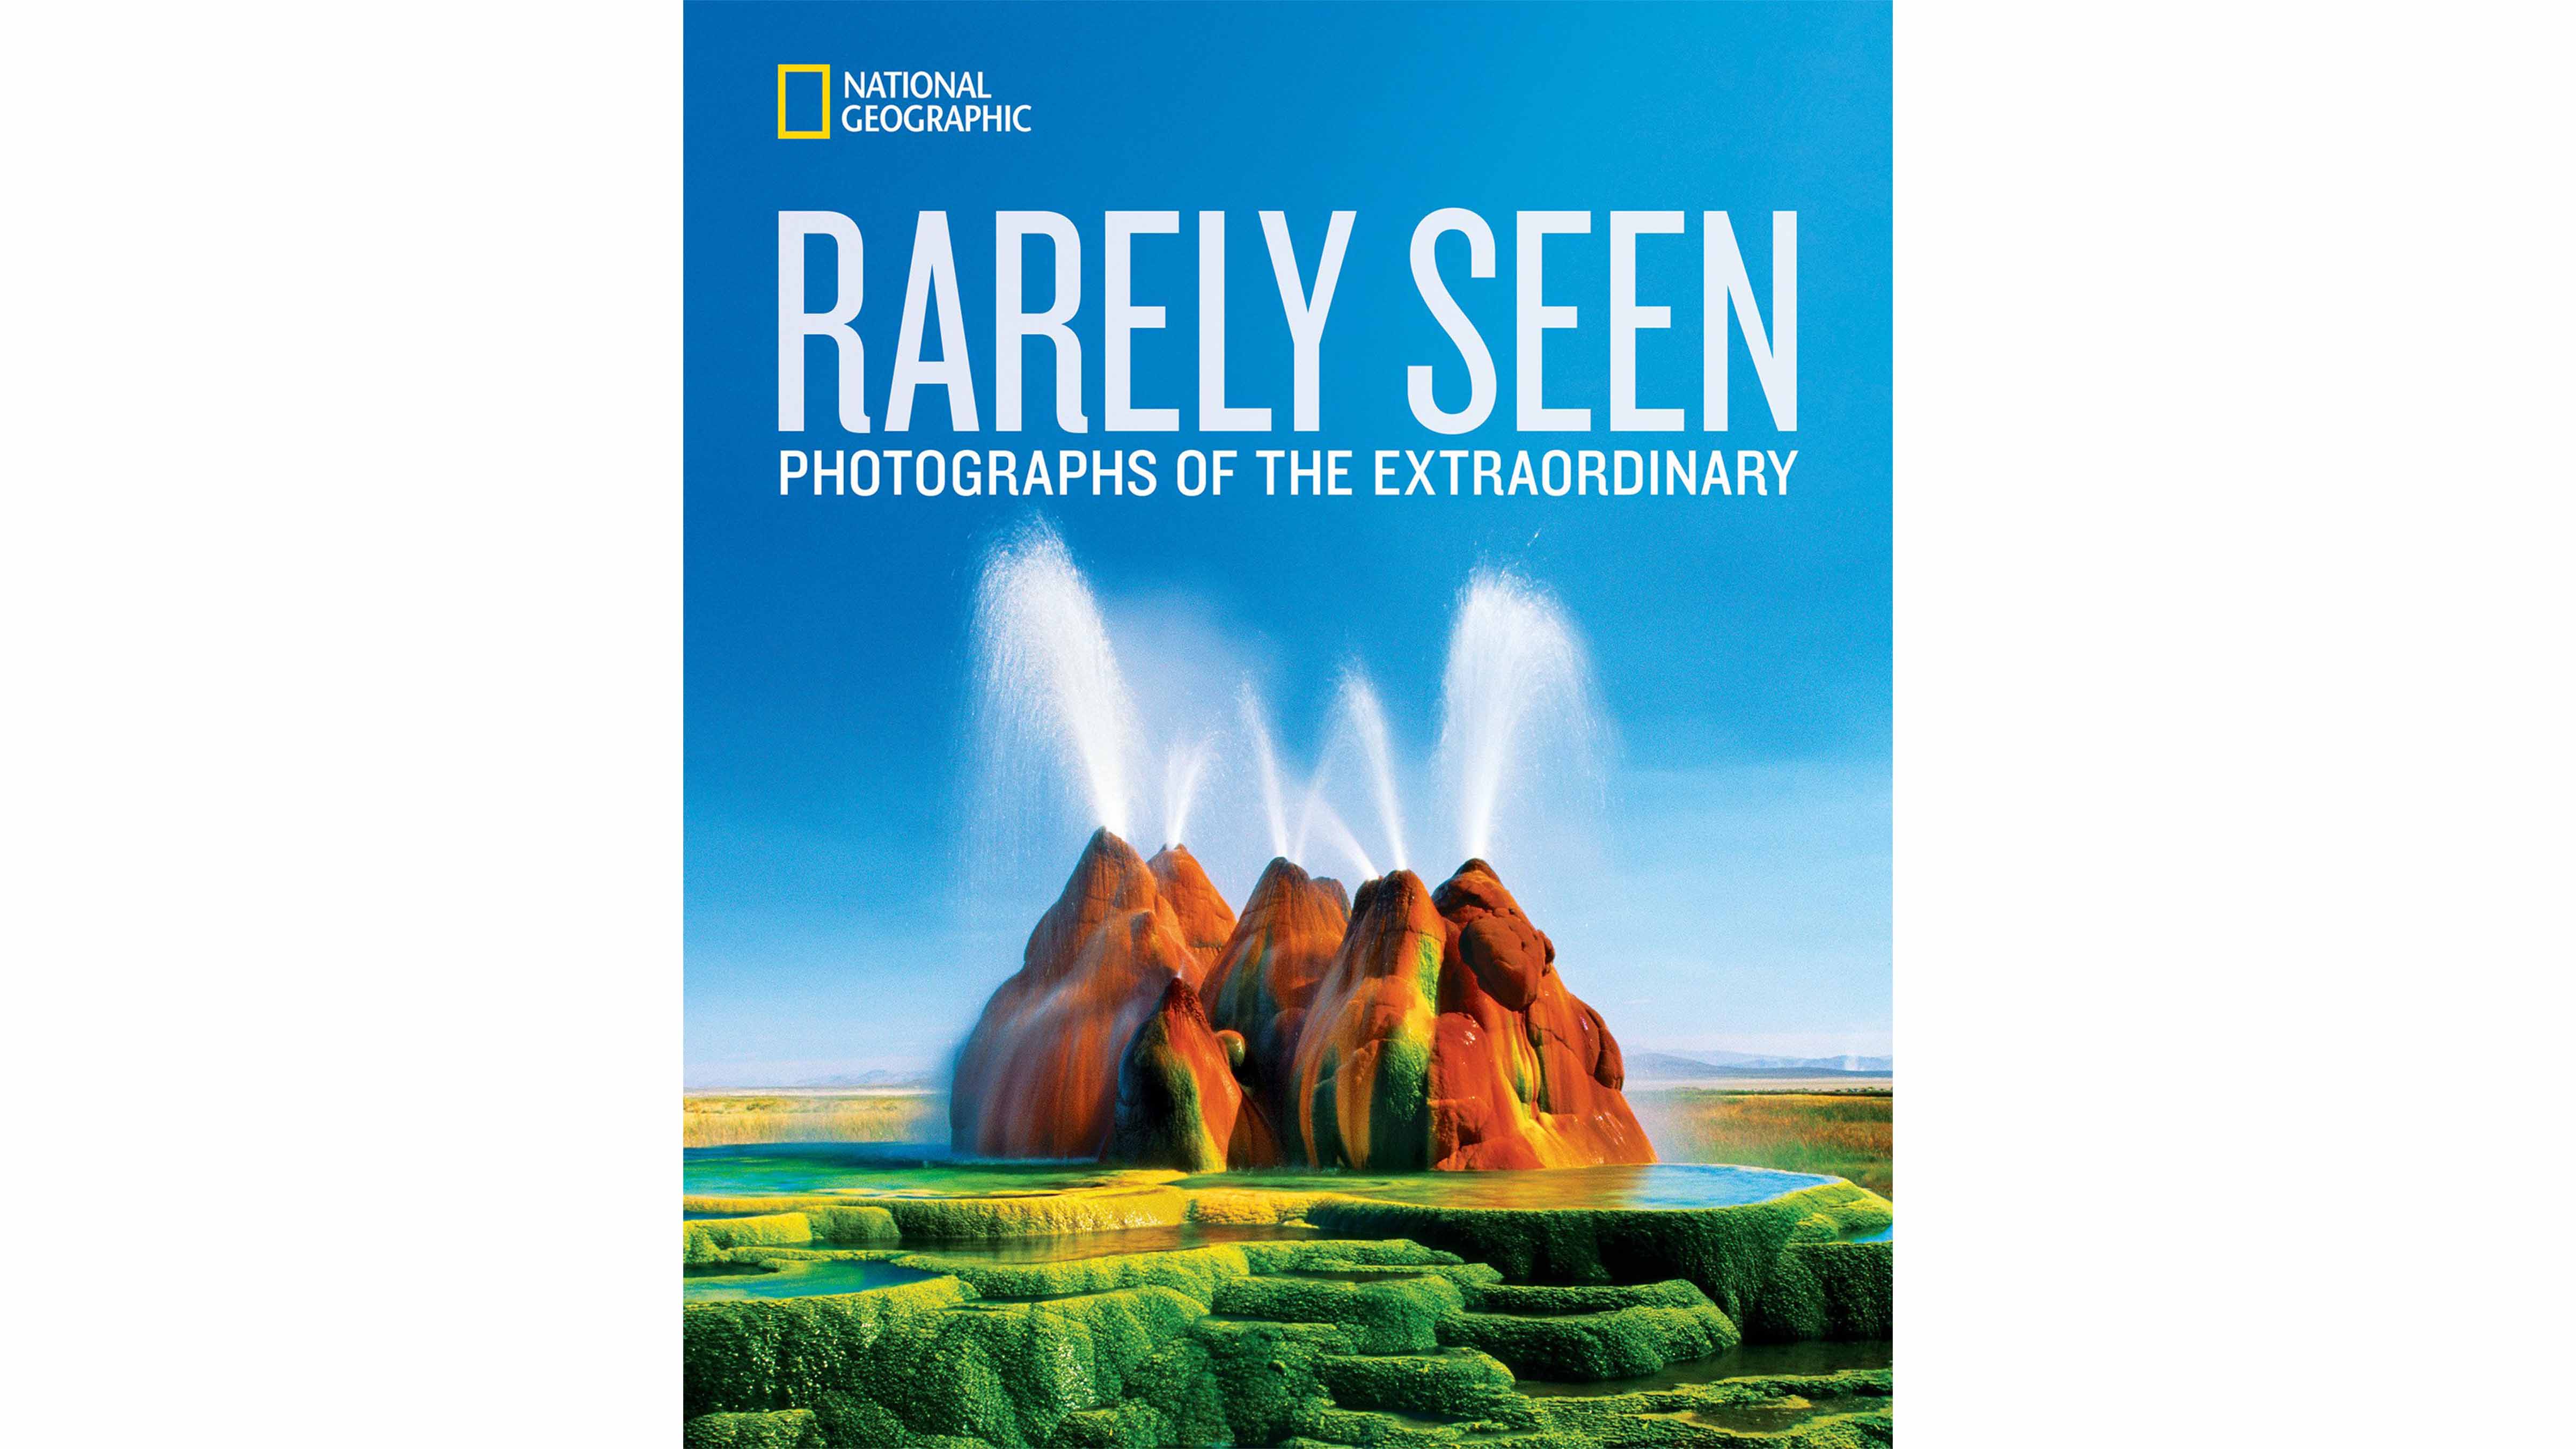 Best photography books: National Geographic Rarely Seen